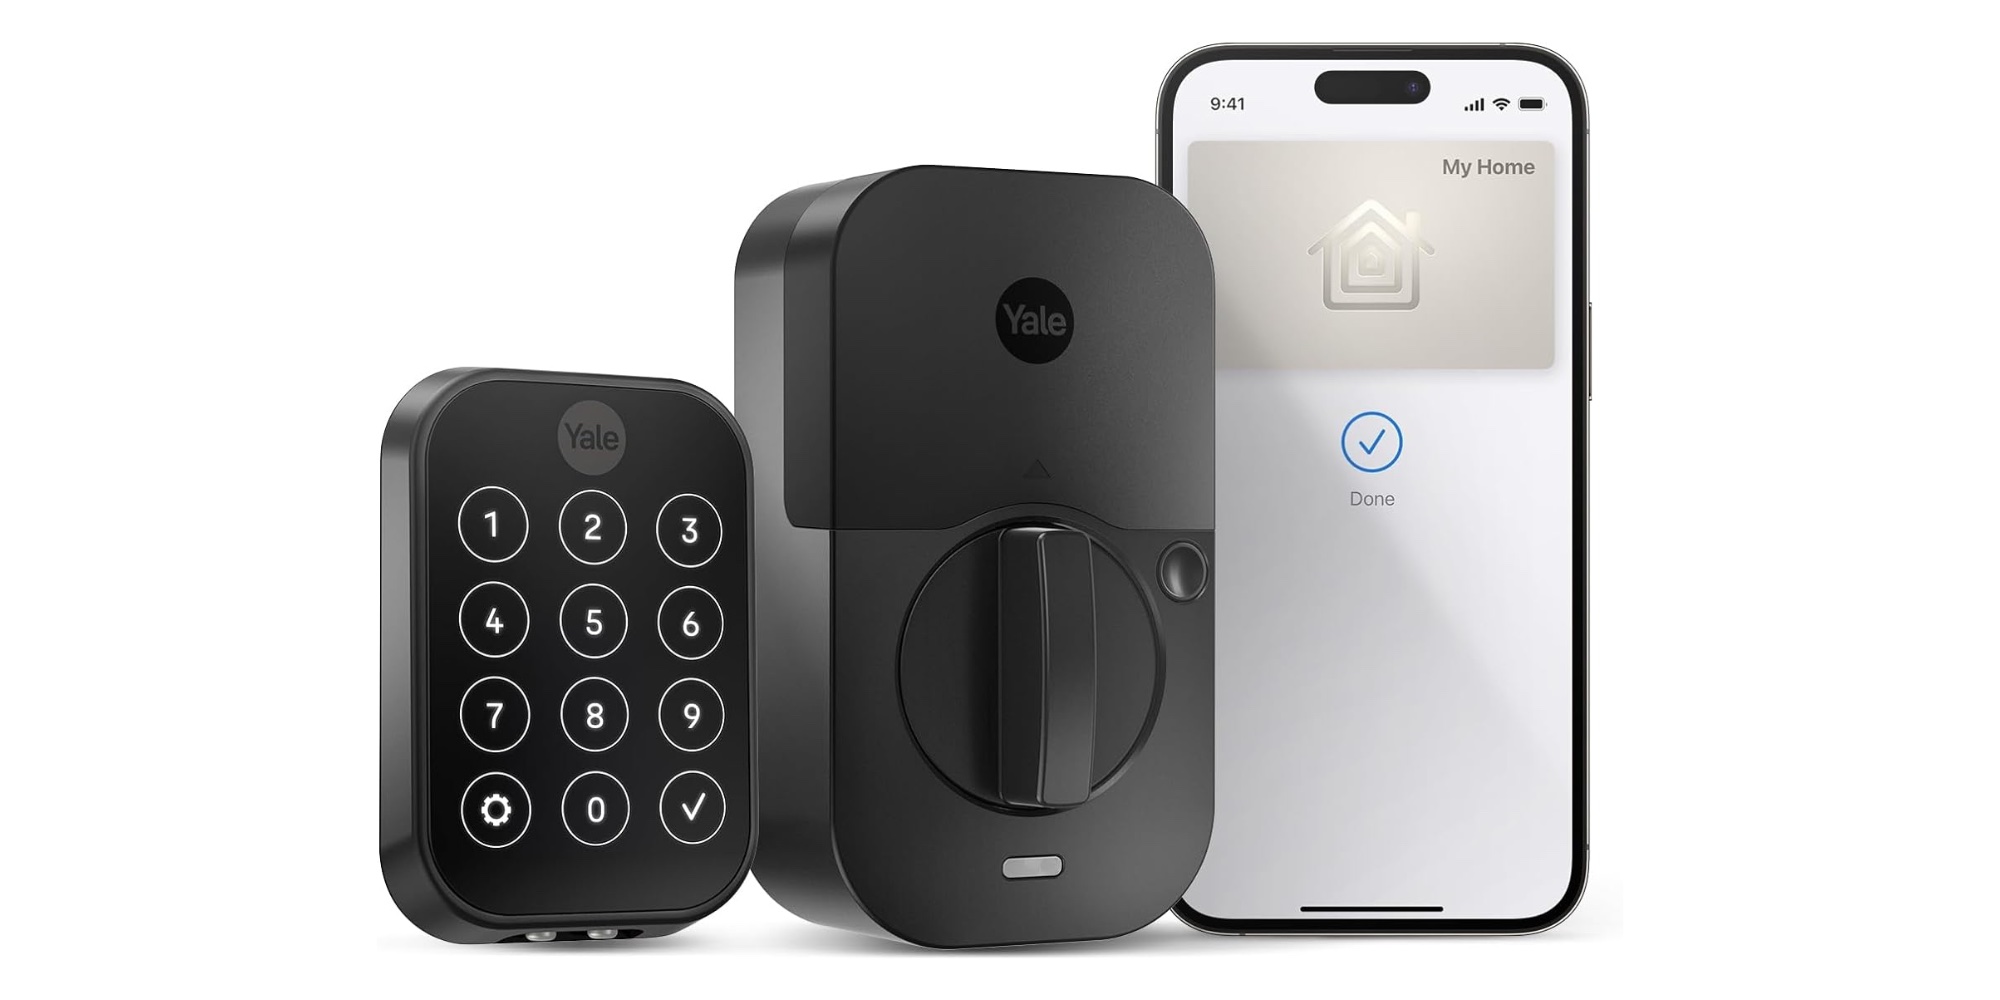 Yale Assure Lock 2 Plus unlocks with just a tap thanks to Apple